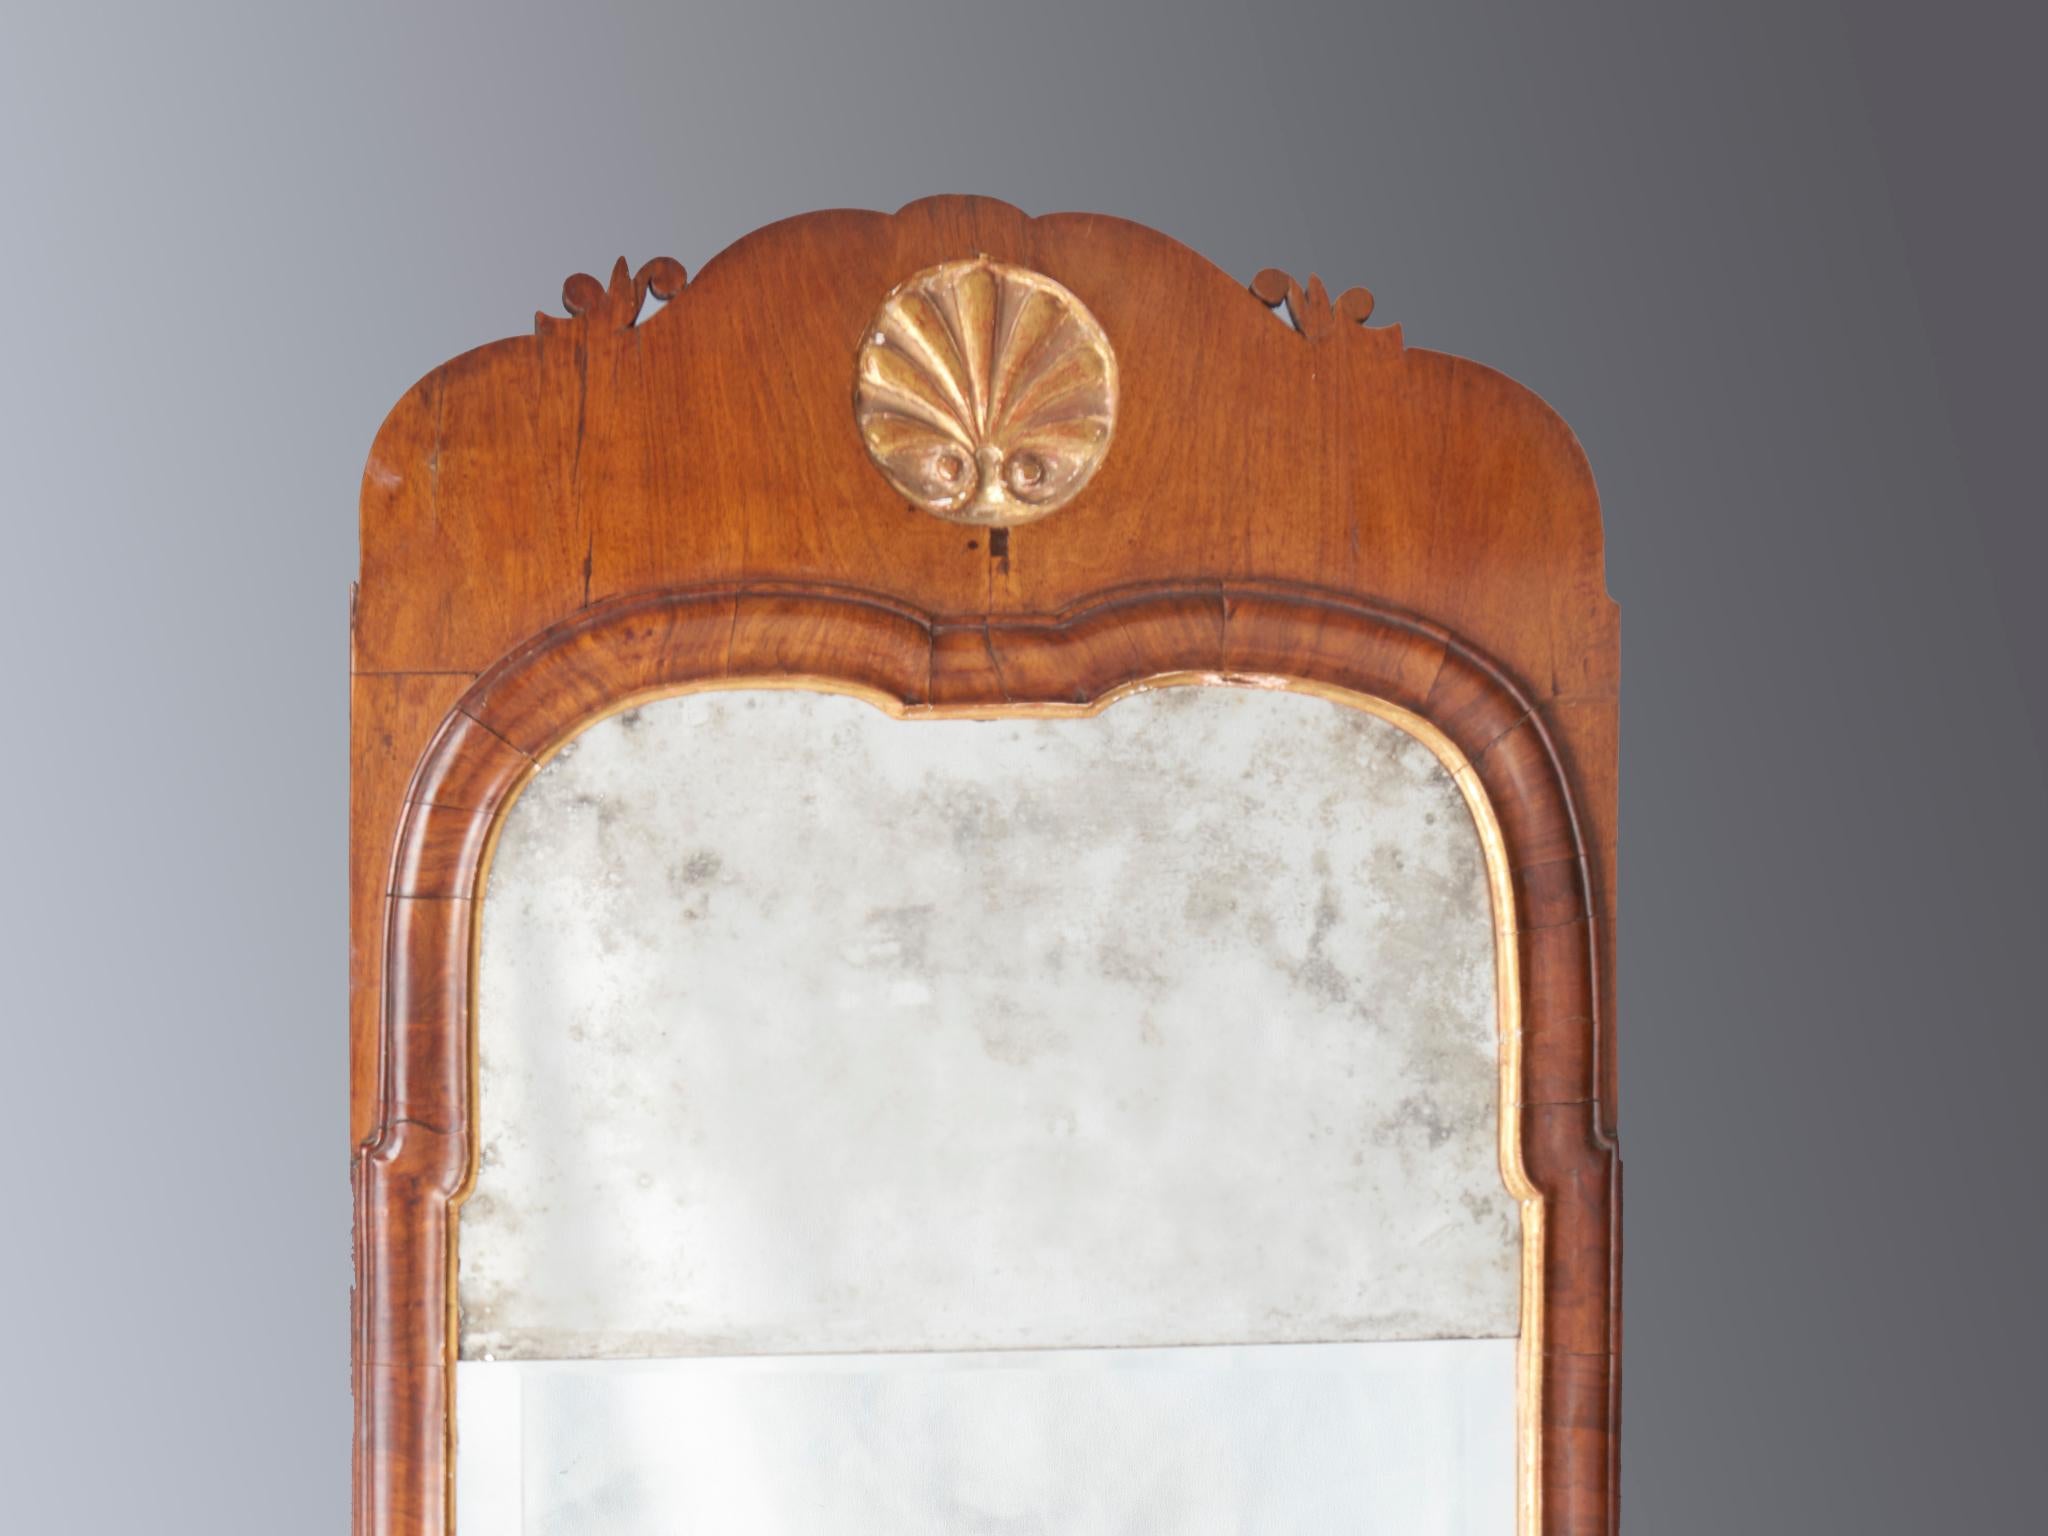 Queen Anne mirror with carved and gilded shell. 2 part glass. English, circa 1740-1750.